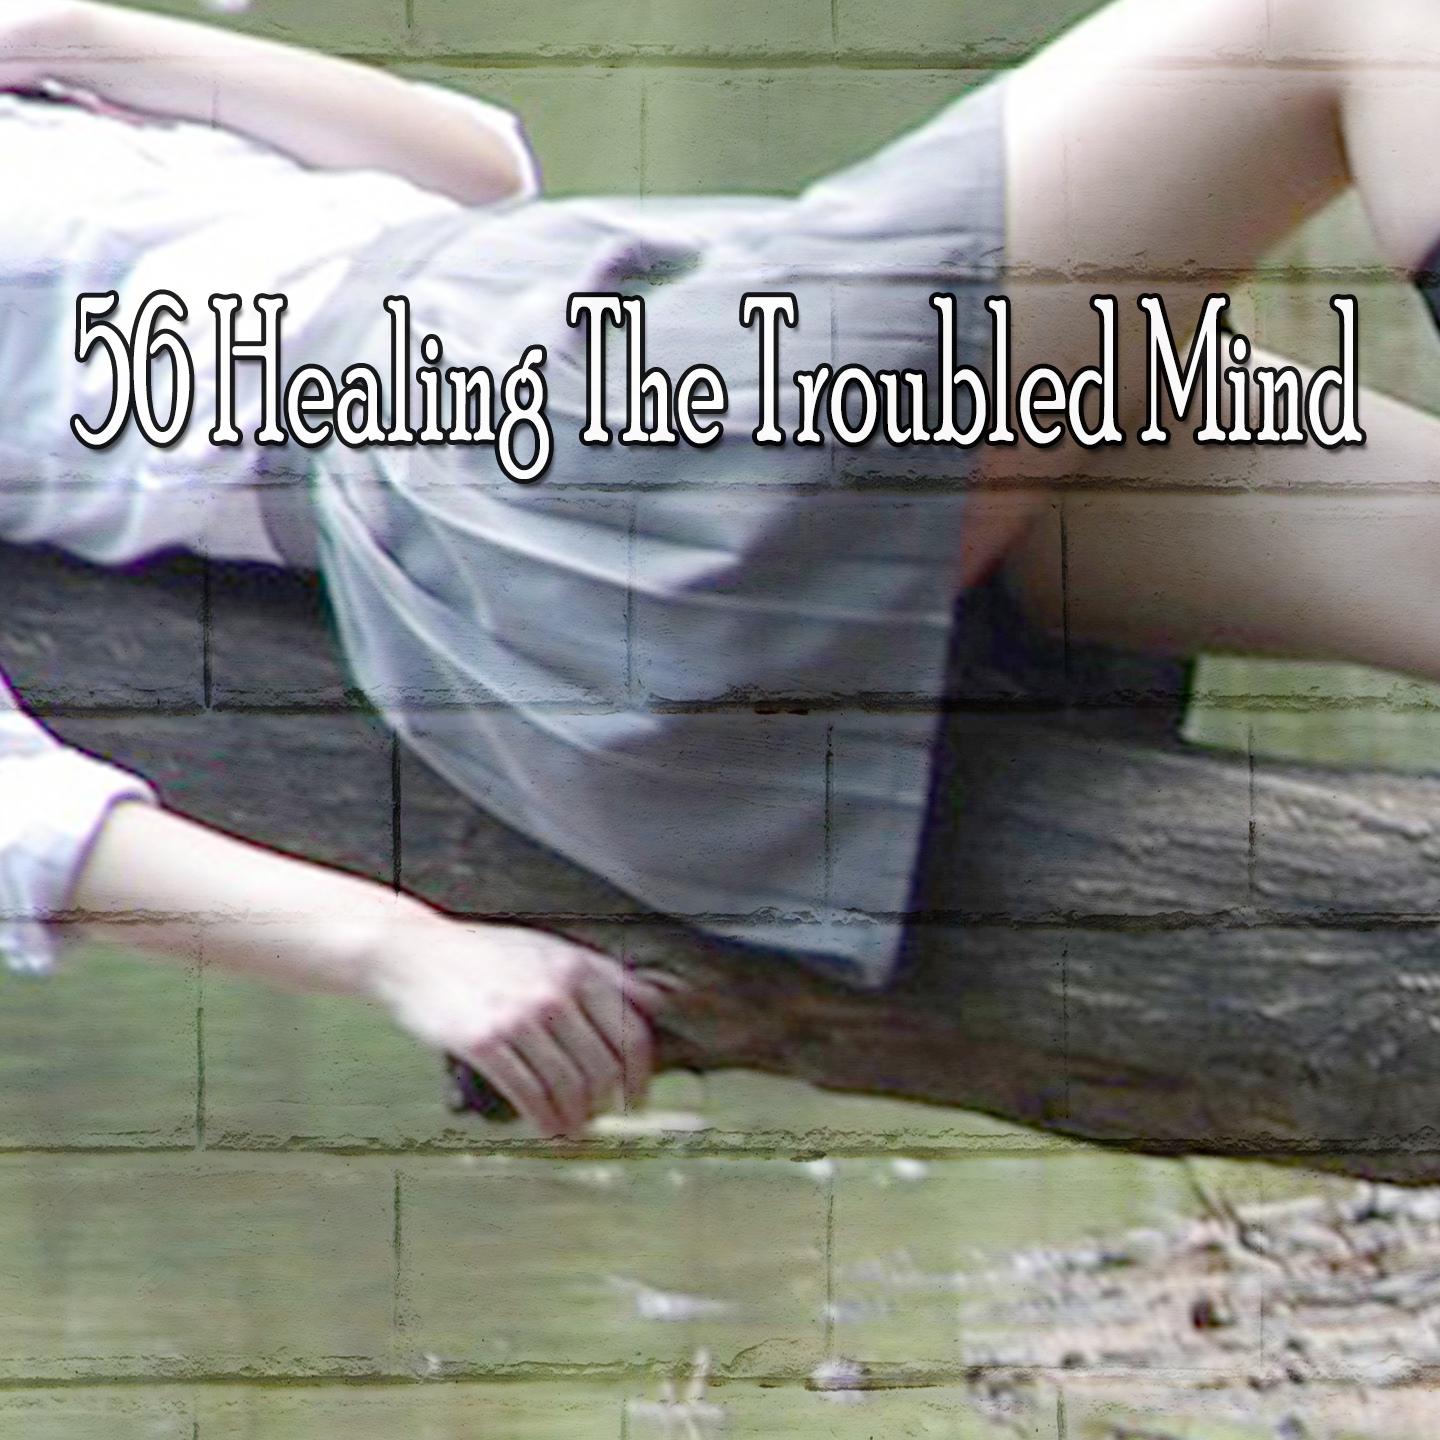 56 Healing the Troubled Mind